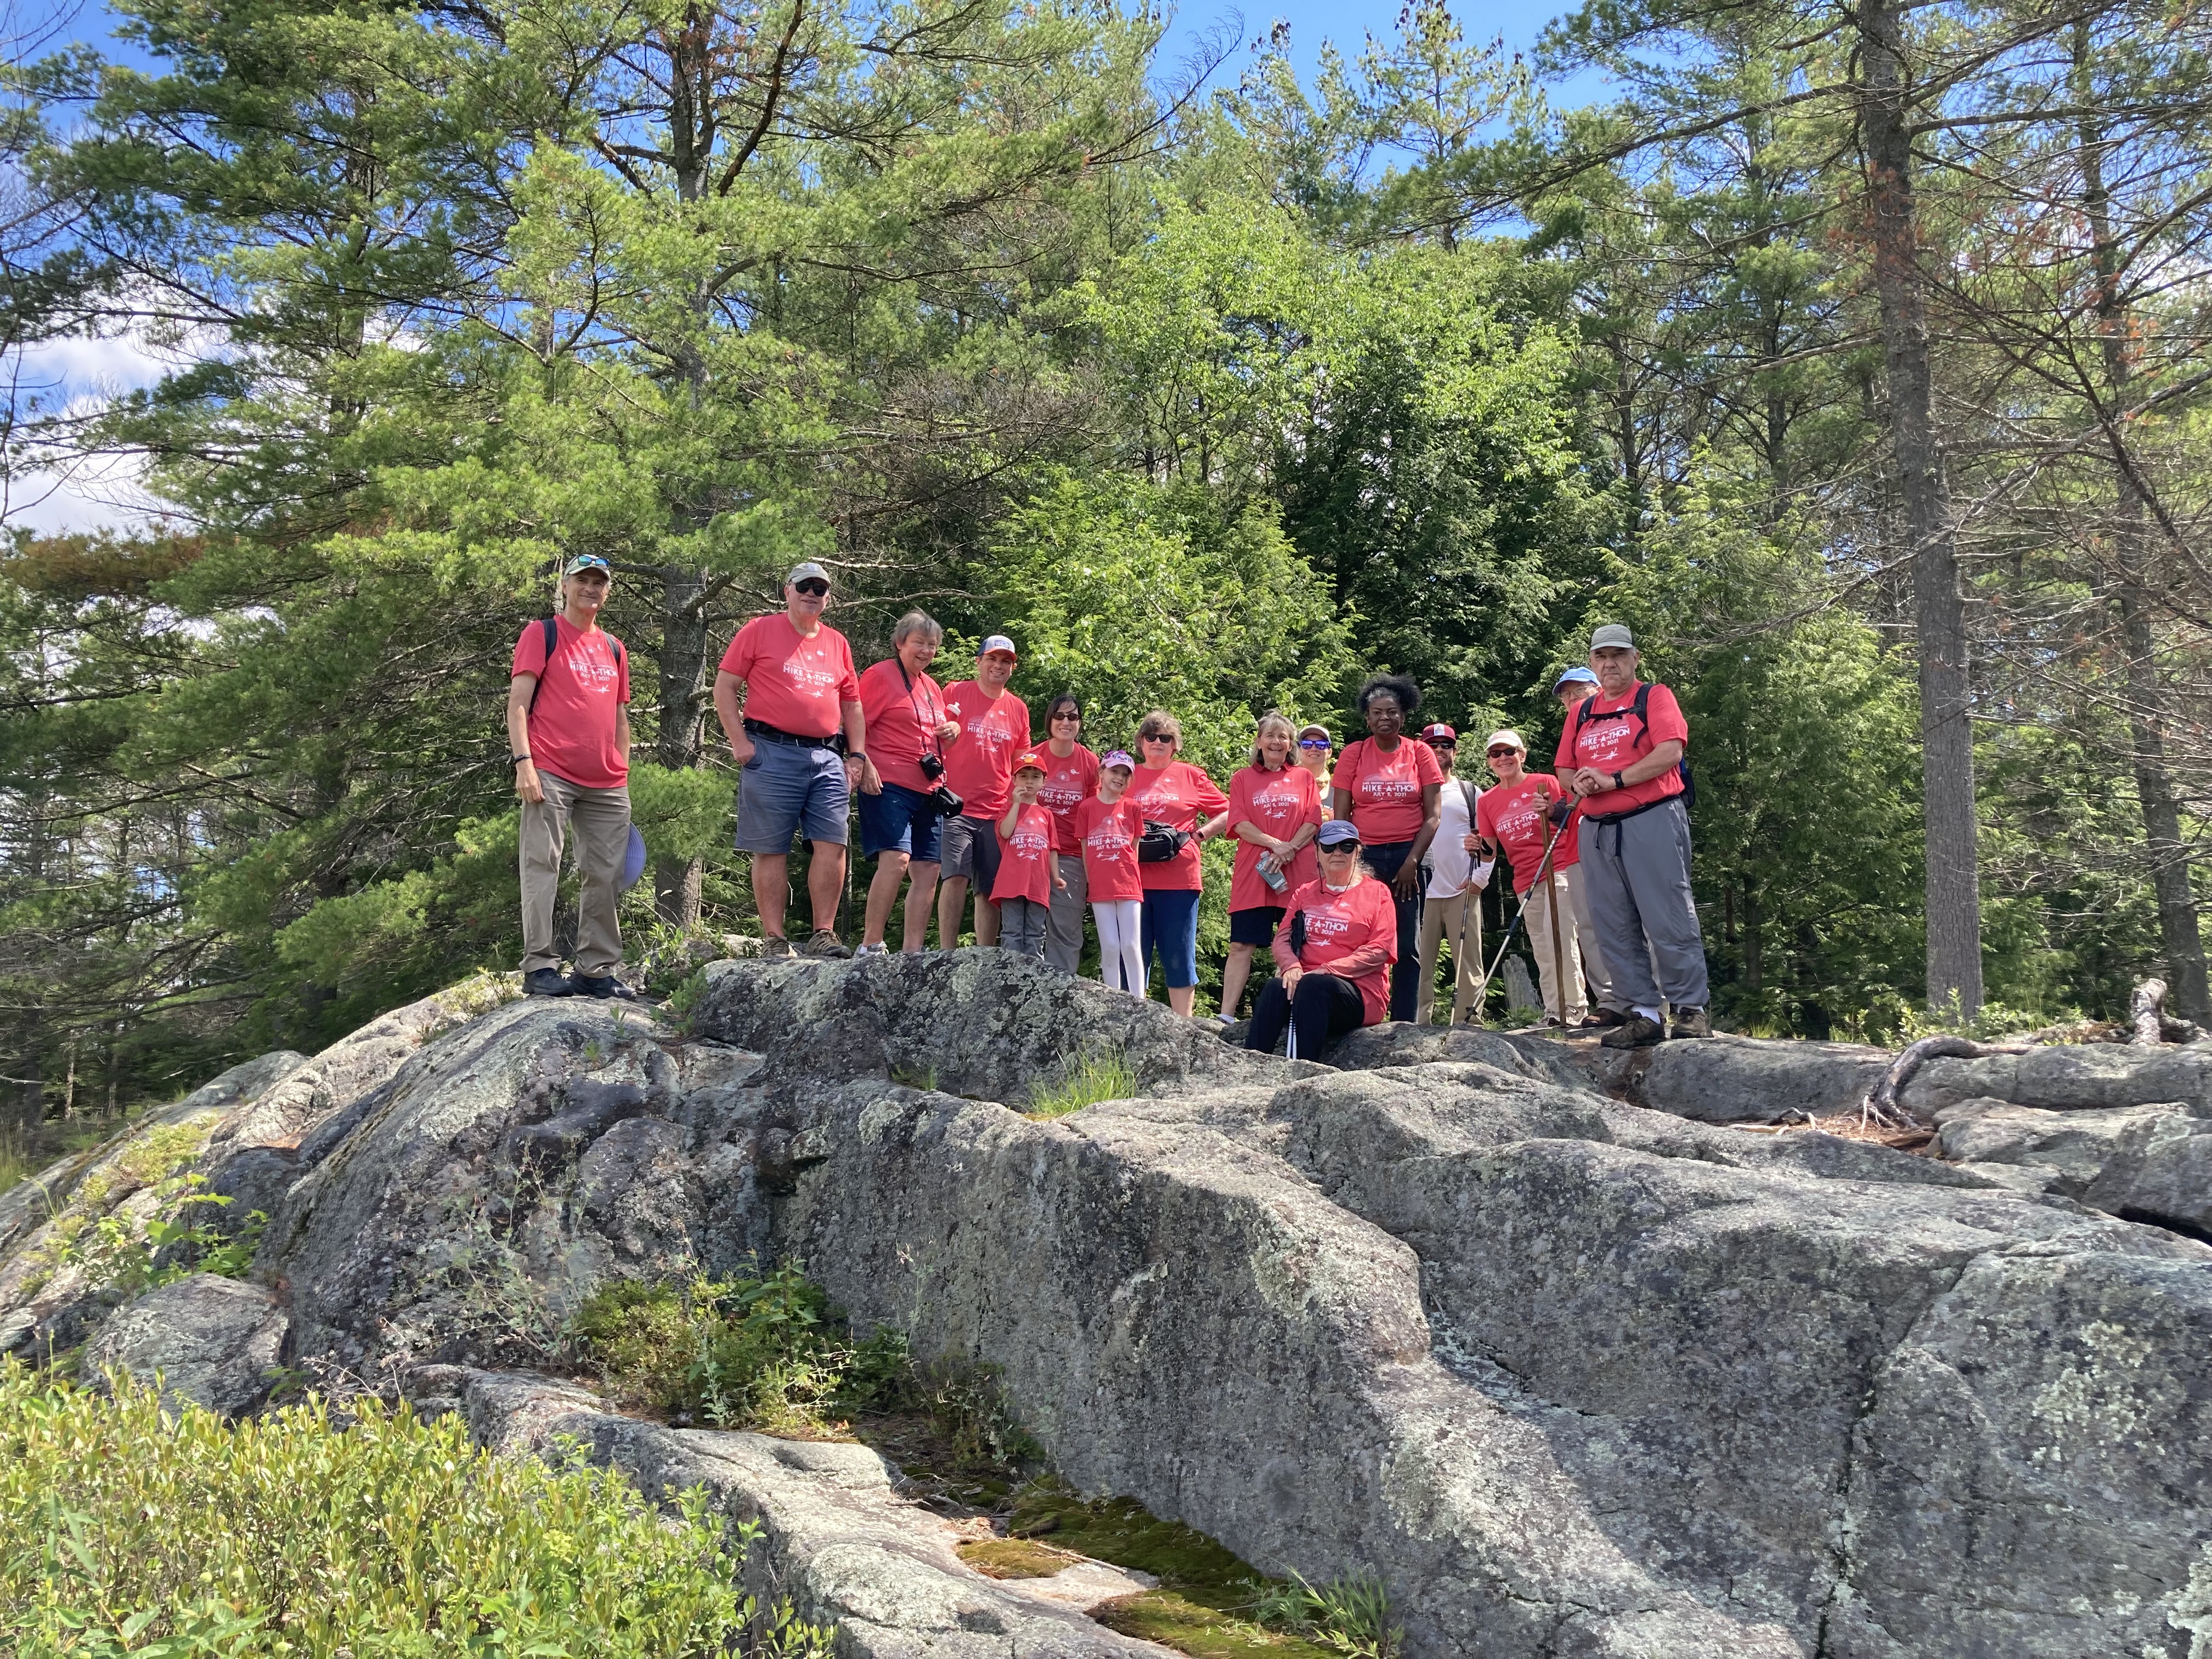 Participants in this year's Hike-A-Thon at Anthony's Nose